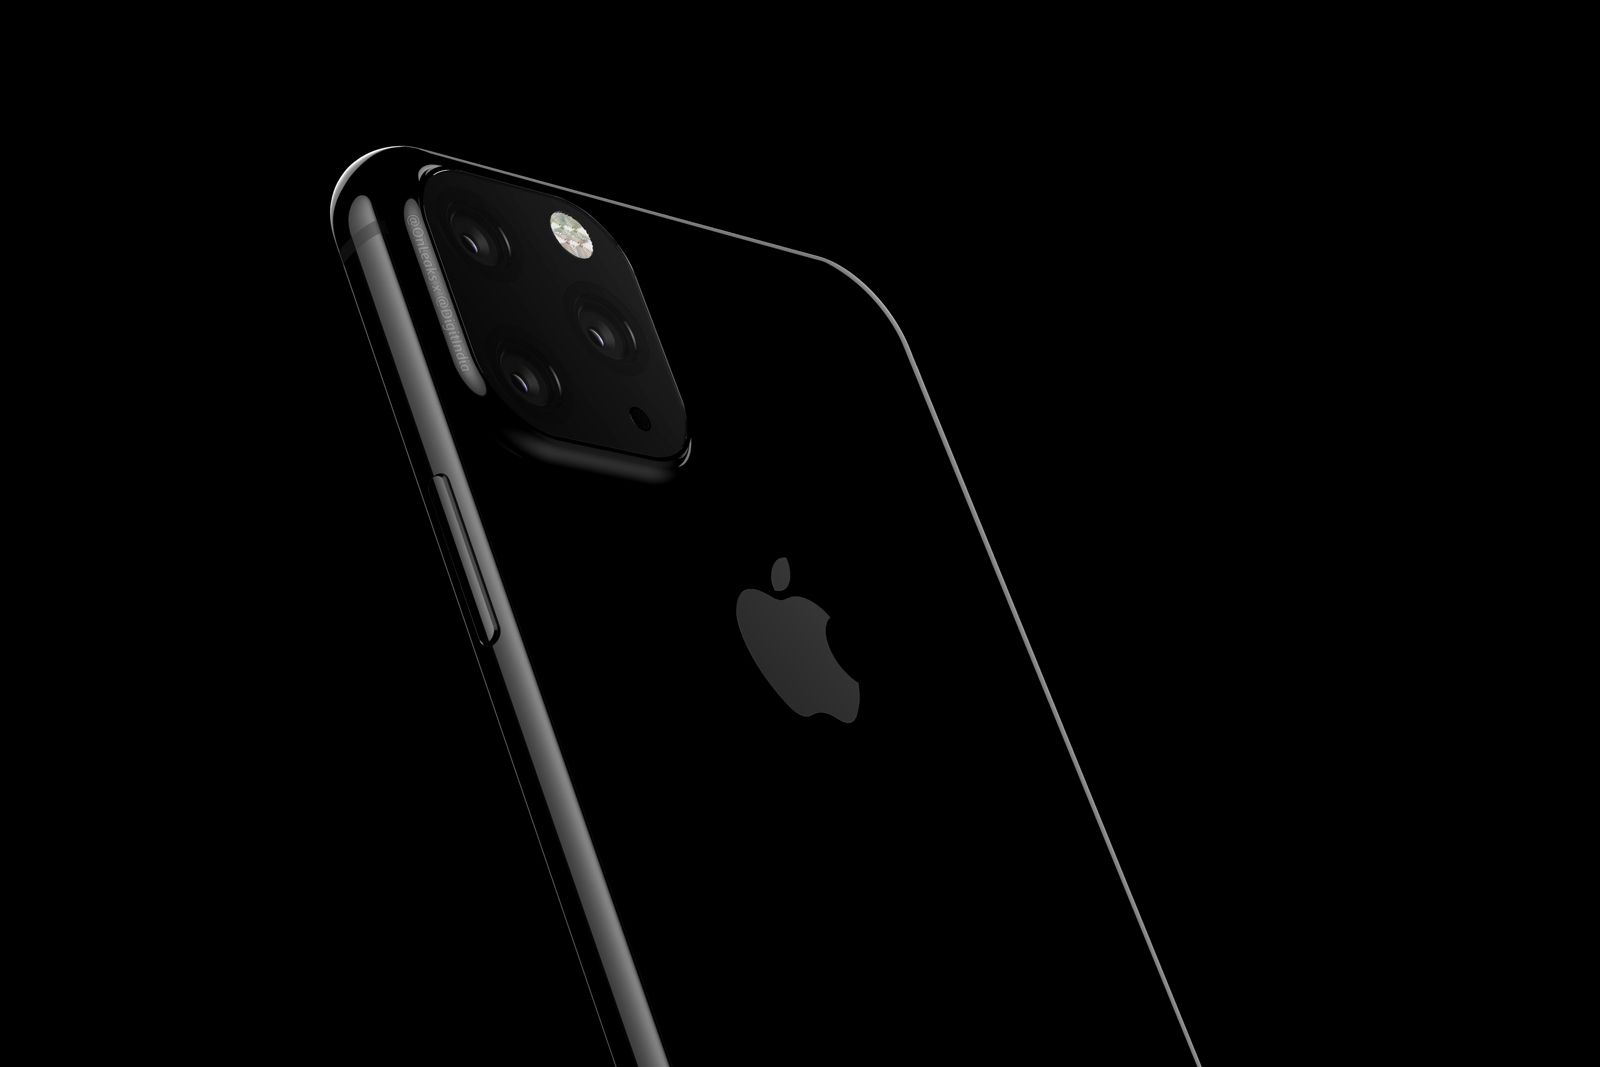 These plans reveal the shape and camera setup of the iPhone XI image 1